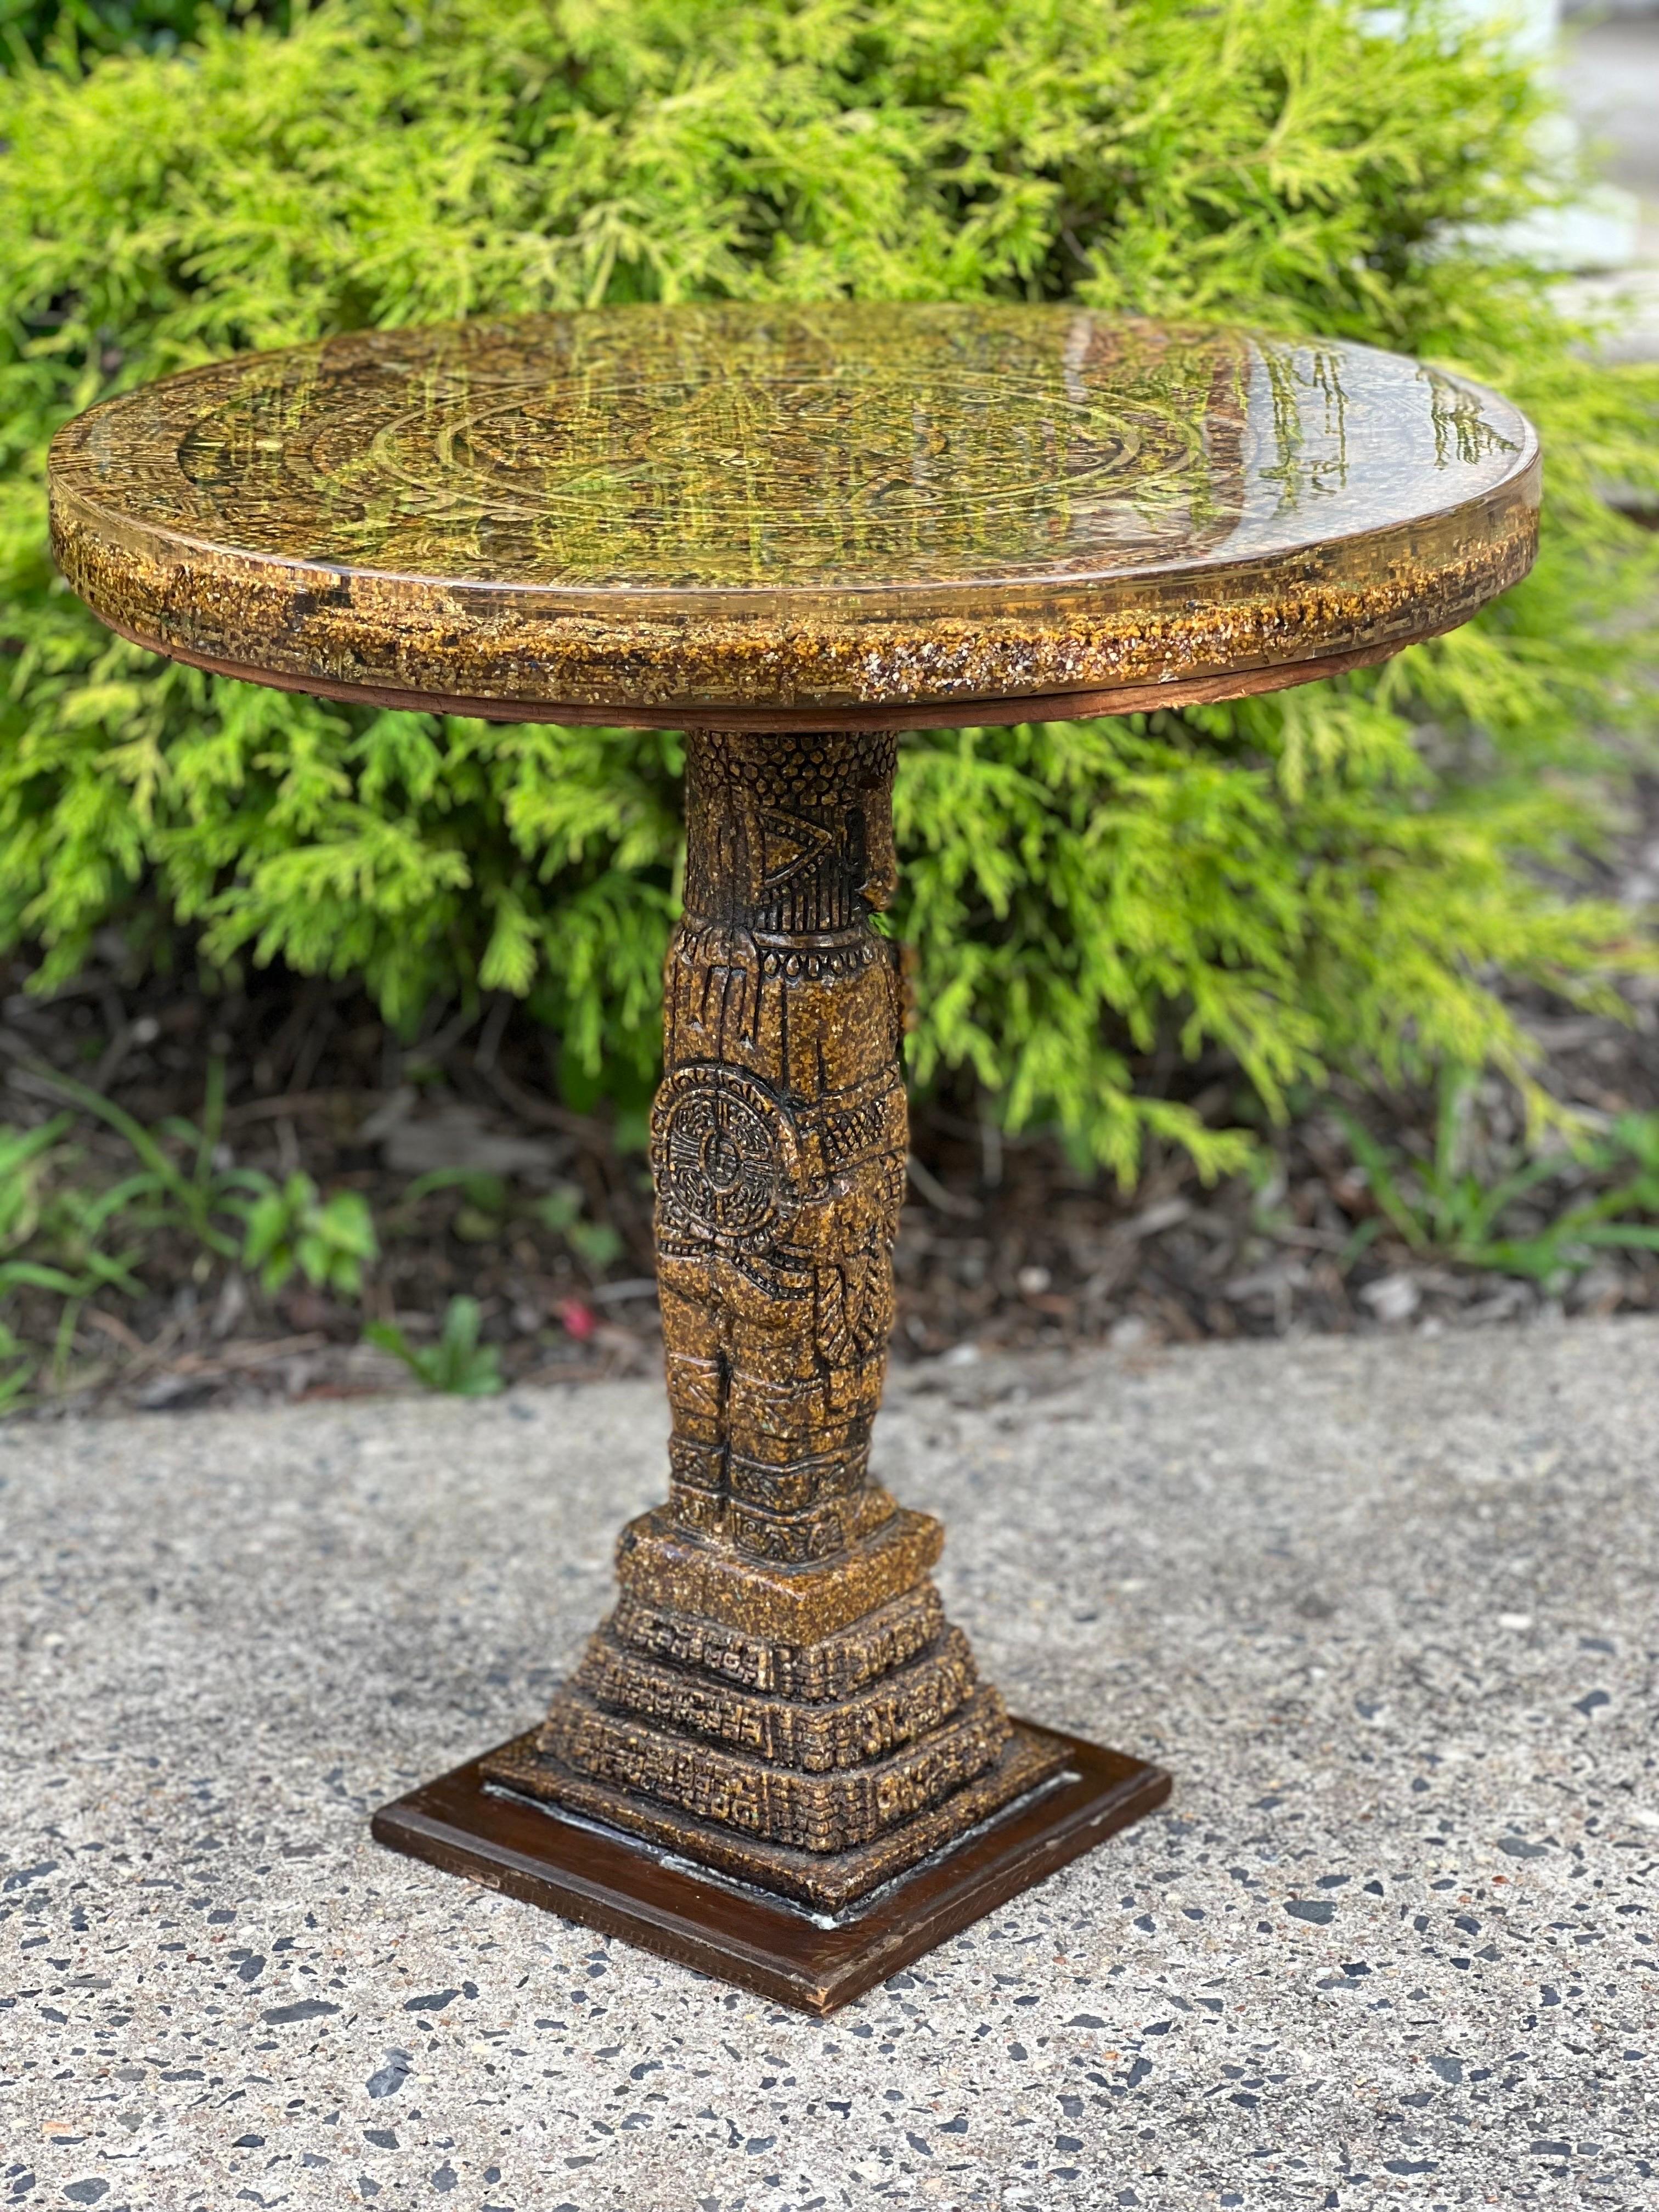 Vintage hand carved Aztec Sun Calendar table, circa 1970's. Made in Mexico.

This pedestal table is intricately carved from Mexican soapstone on a square wood base.  The tabletop is encased in thick lucite, so it is protected and has a smooth